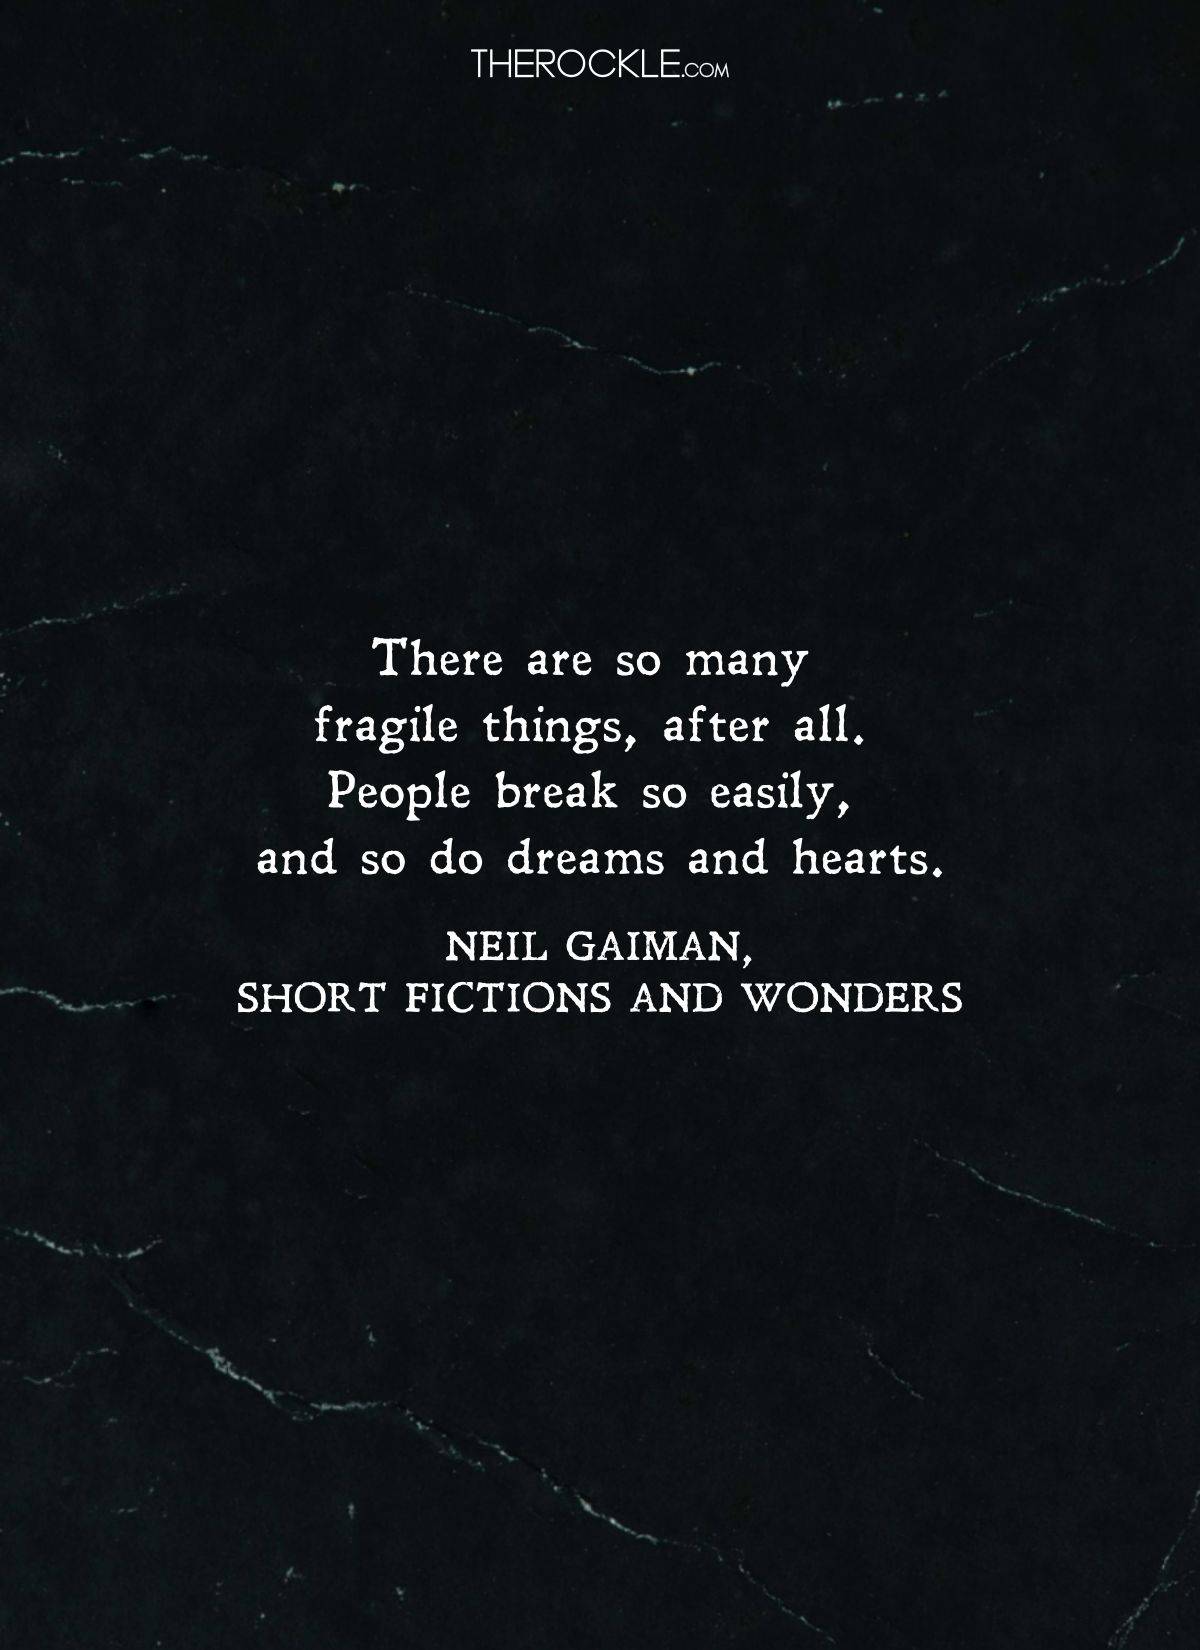 Neil Gaiman quote on human fragility from Short Fictions and Wonders